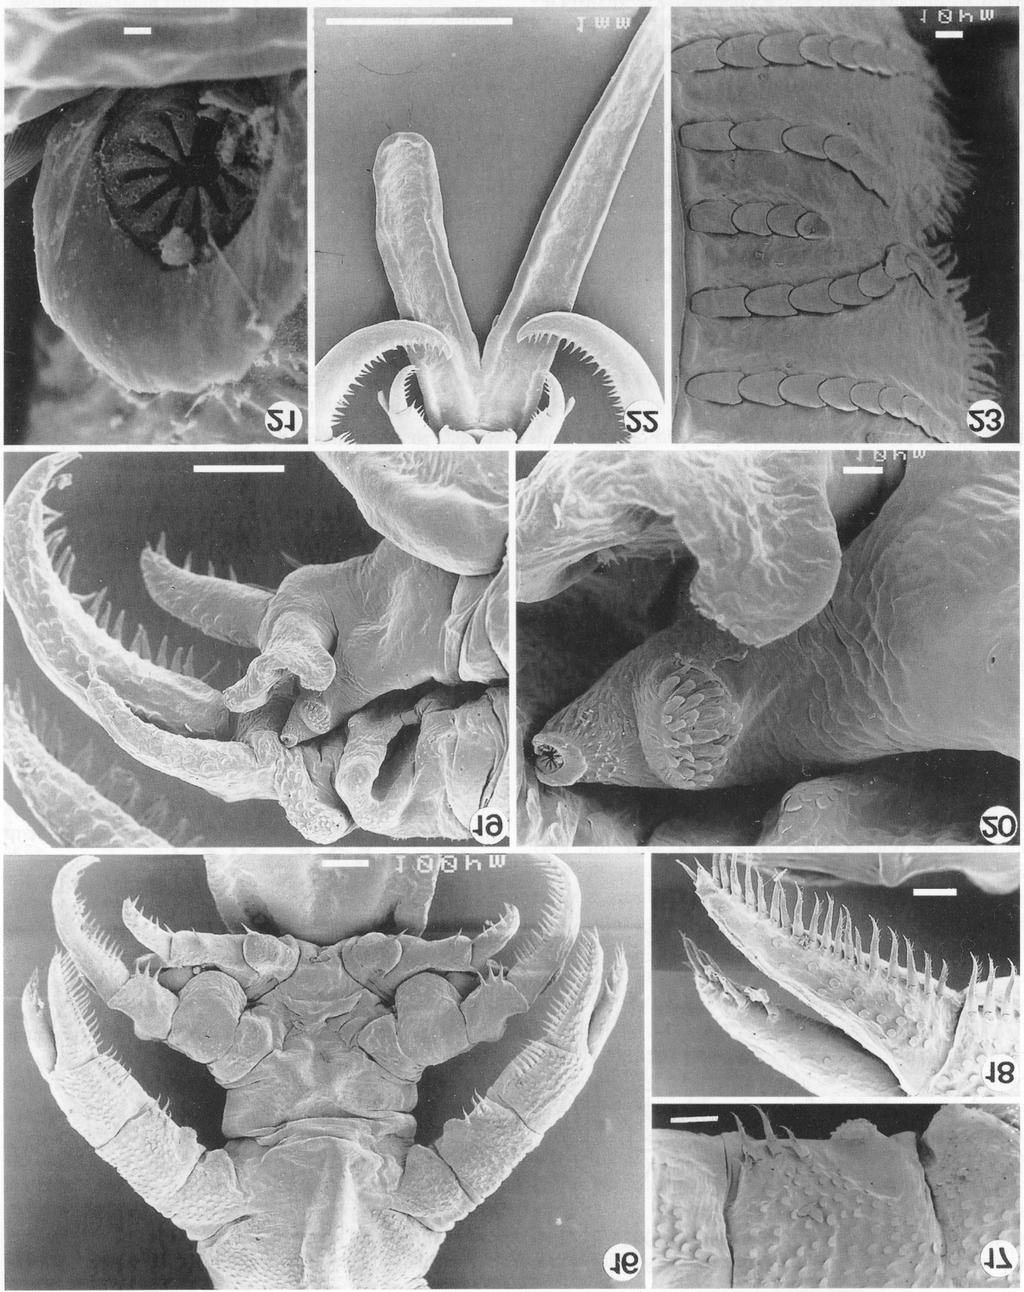 Figs. 16-23. Scanning electron micrographs of Chonopeltis liversedgei sp. n. Figs. 16-21. Male. Figs. 22, 23. Female. Fig. 16. Legs 2, 3 and 4, ventral view. Fig. 17. Bulbous protrusions on leg 2.